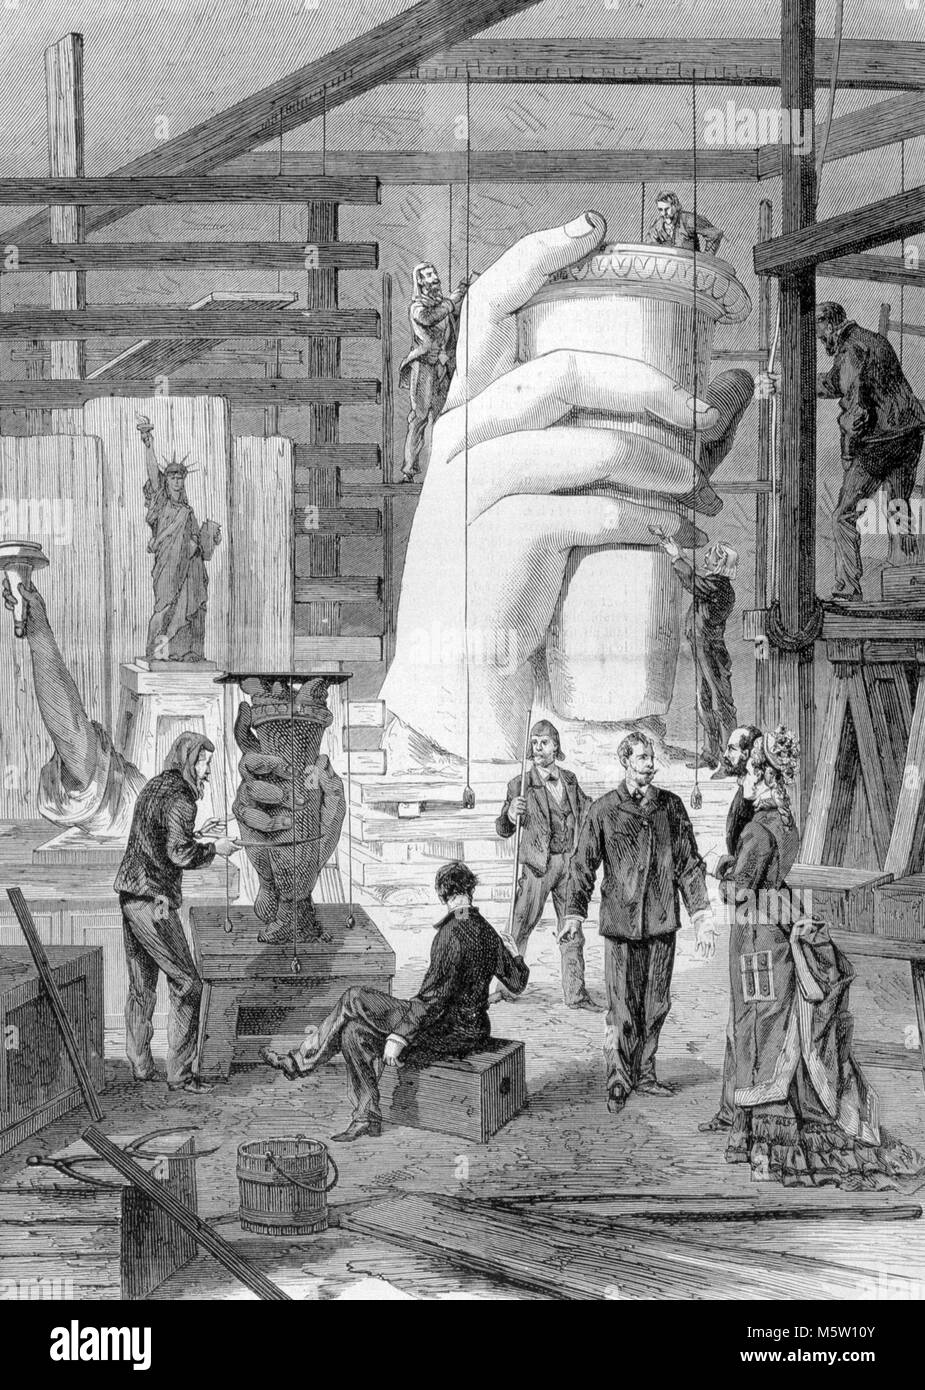 FREDERIC AUGUSTE BARTHOLDI (1834-1904) French sculptor who designed the Statue of Liberty.  The Statue under construction in his Paris studio. Stock Photo